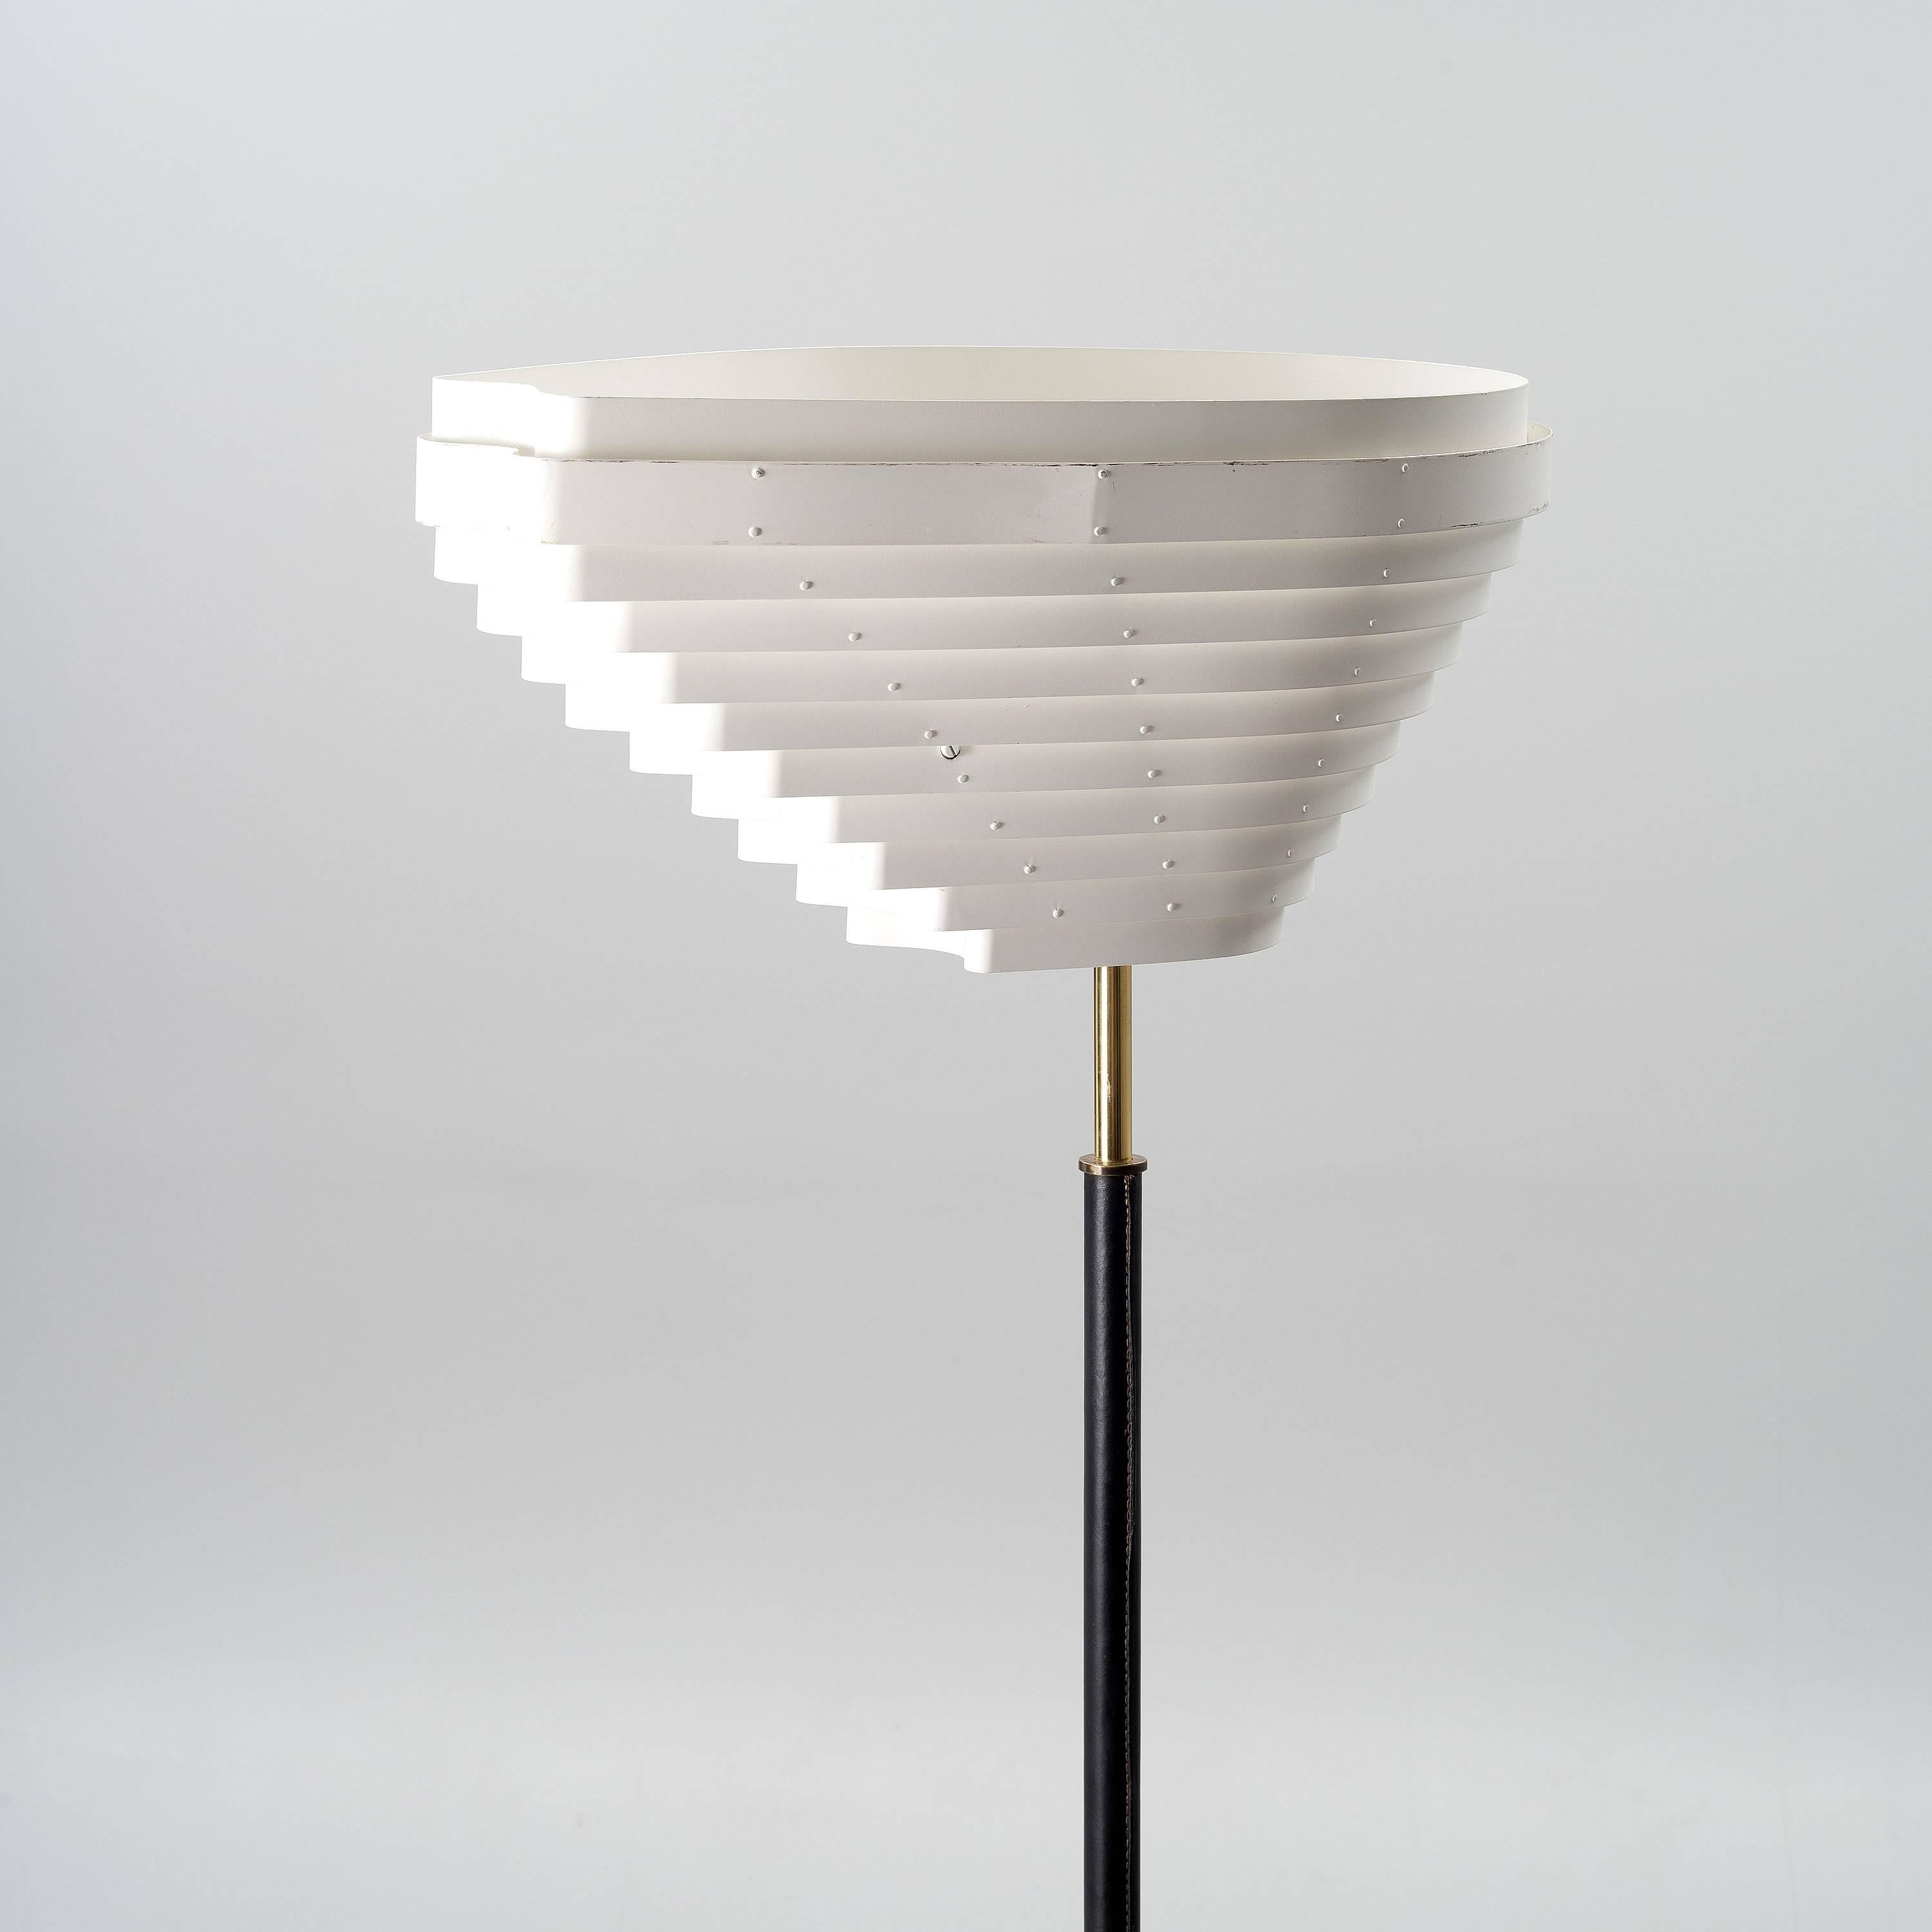 Floor lamp model A805 'Angel Wing', in metal, leather and brass, by Alvar Aalto for Valaistustyö, Finland, 1954.